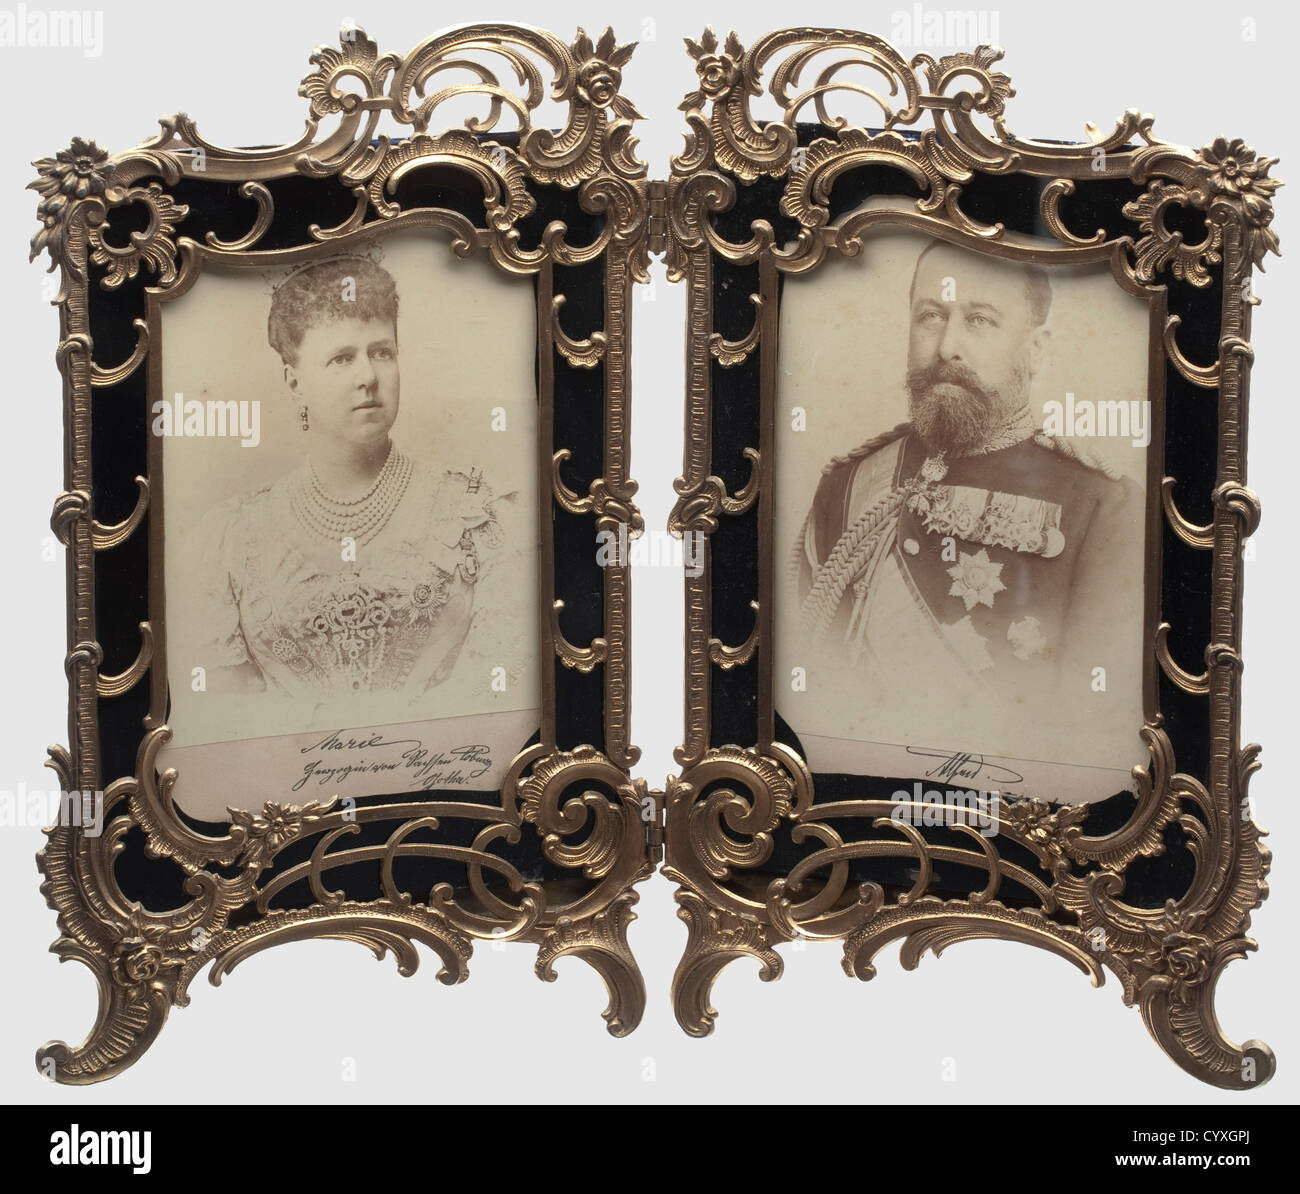 Grand Duchess Maria Alexandrowna(1853 - 1920)Duke Alfred von Saxe-Coburg and Gotha(1844 - 1900)dated 1893,a framed presentation photograph of the ducal couple.Photographs on reinforced cardboard,each of them with autograph signatures "Marie Herzogin von Sachsen Coburg Gotha 1893" and "Alfred Herzog von Sachsen Coburg Gotha 1893" in a finely made fire-gilt brass frame.Grand Duchess Maria Alexandrowna of Russia was the daughter of Tsar Alexander II.She married His Royal Highness Alfred of Great Britain on 23 January 1874,who became reigning Duke of Saxe,Additional-Rights-Clearences-Not Available Stock Photo